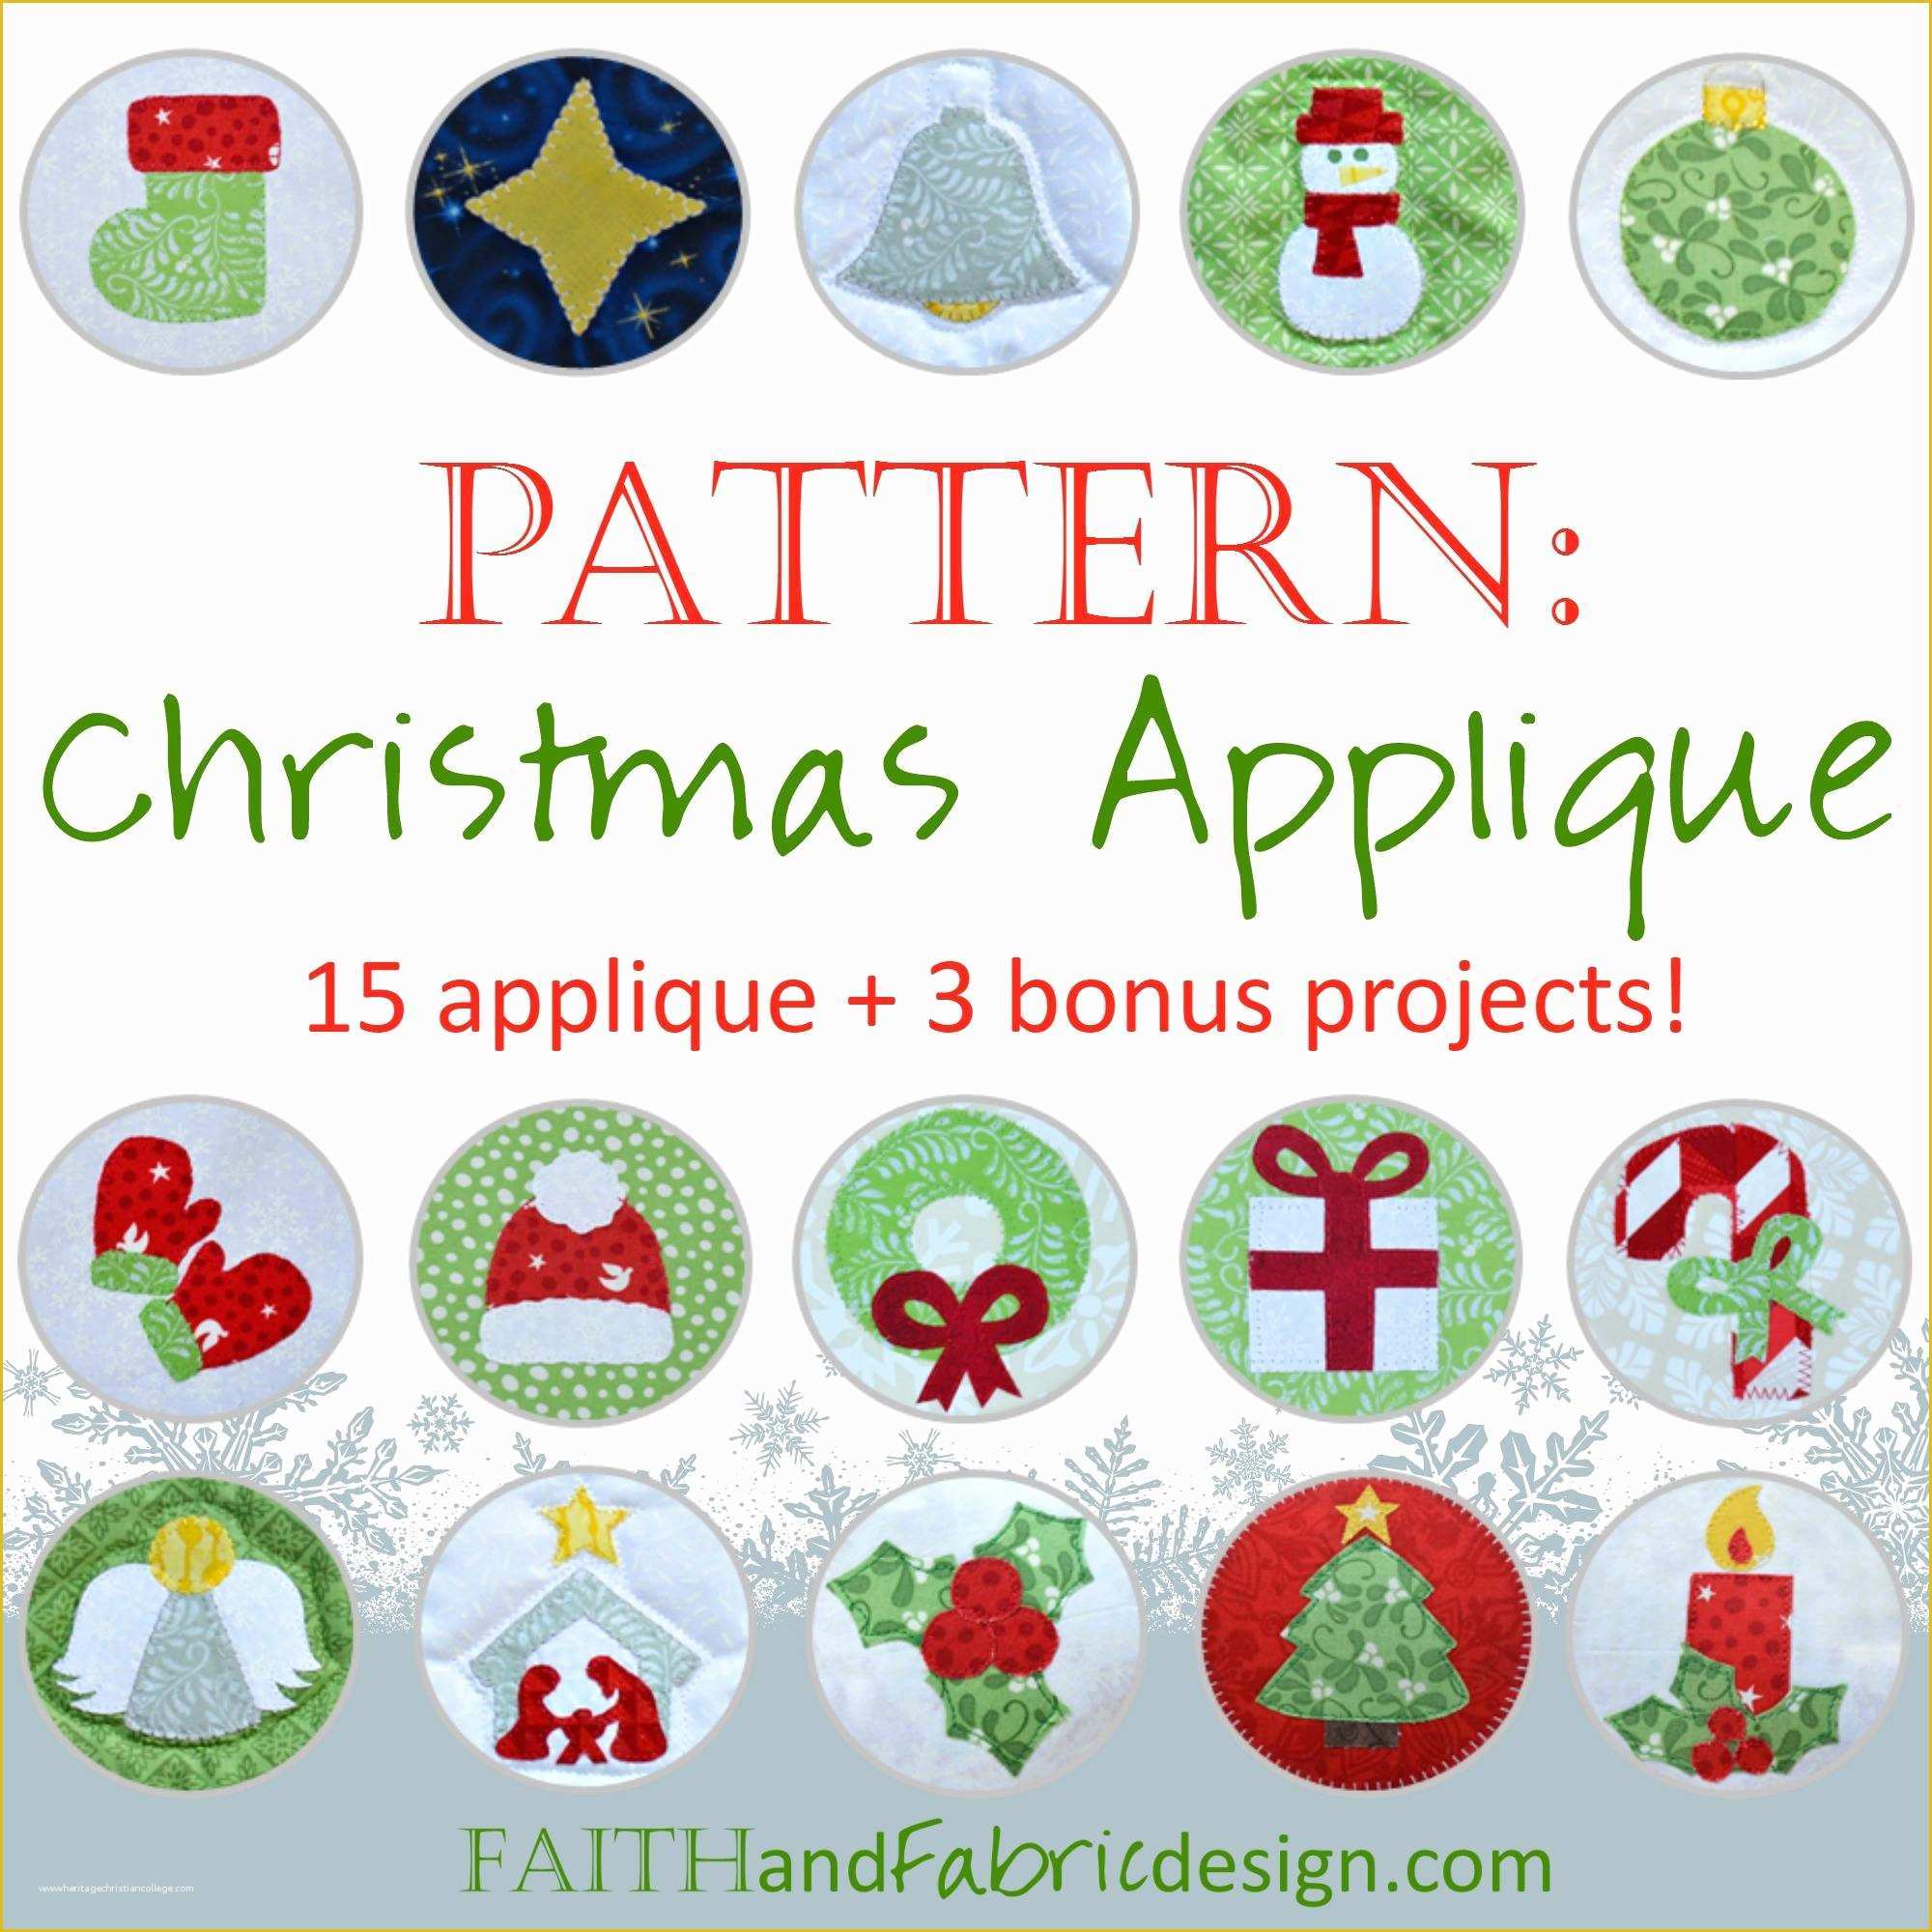 Free Christmas Applique Templates Of Quilt Pattern Christmas and Winter Applique Gift Ideas